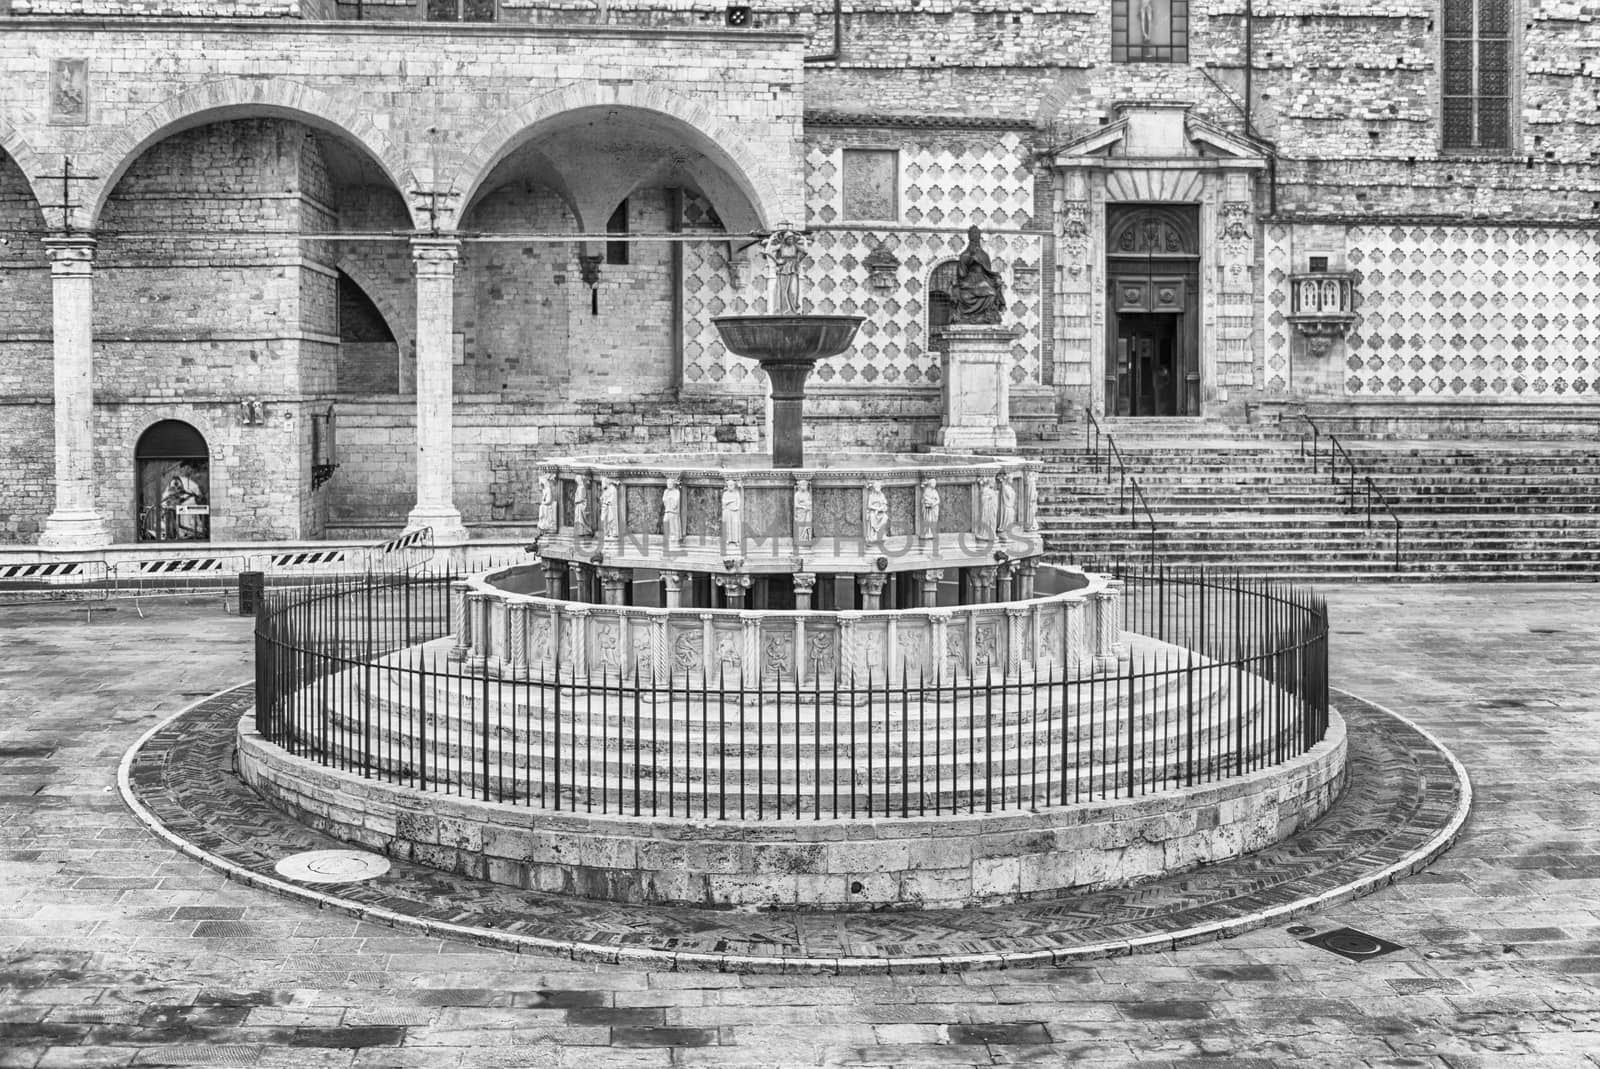 View of Fontana Maggiore, monumental medieval fountain located between the cathedral and the Palazzo dei Priori in the city of Perugia, Italy